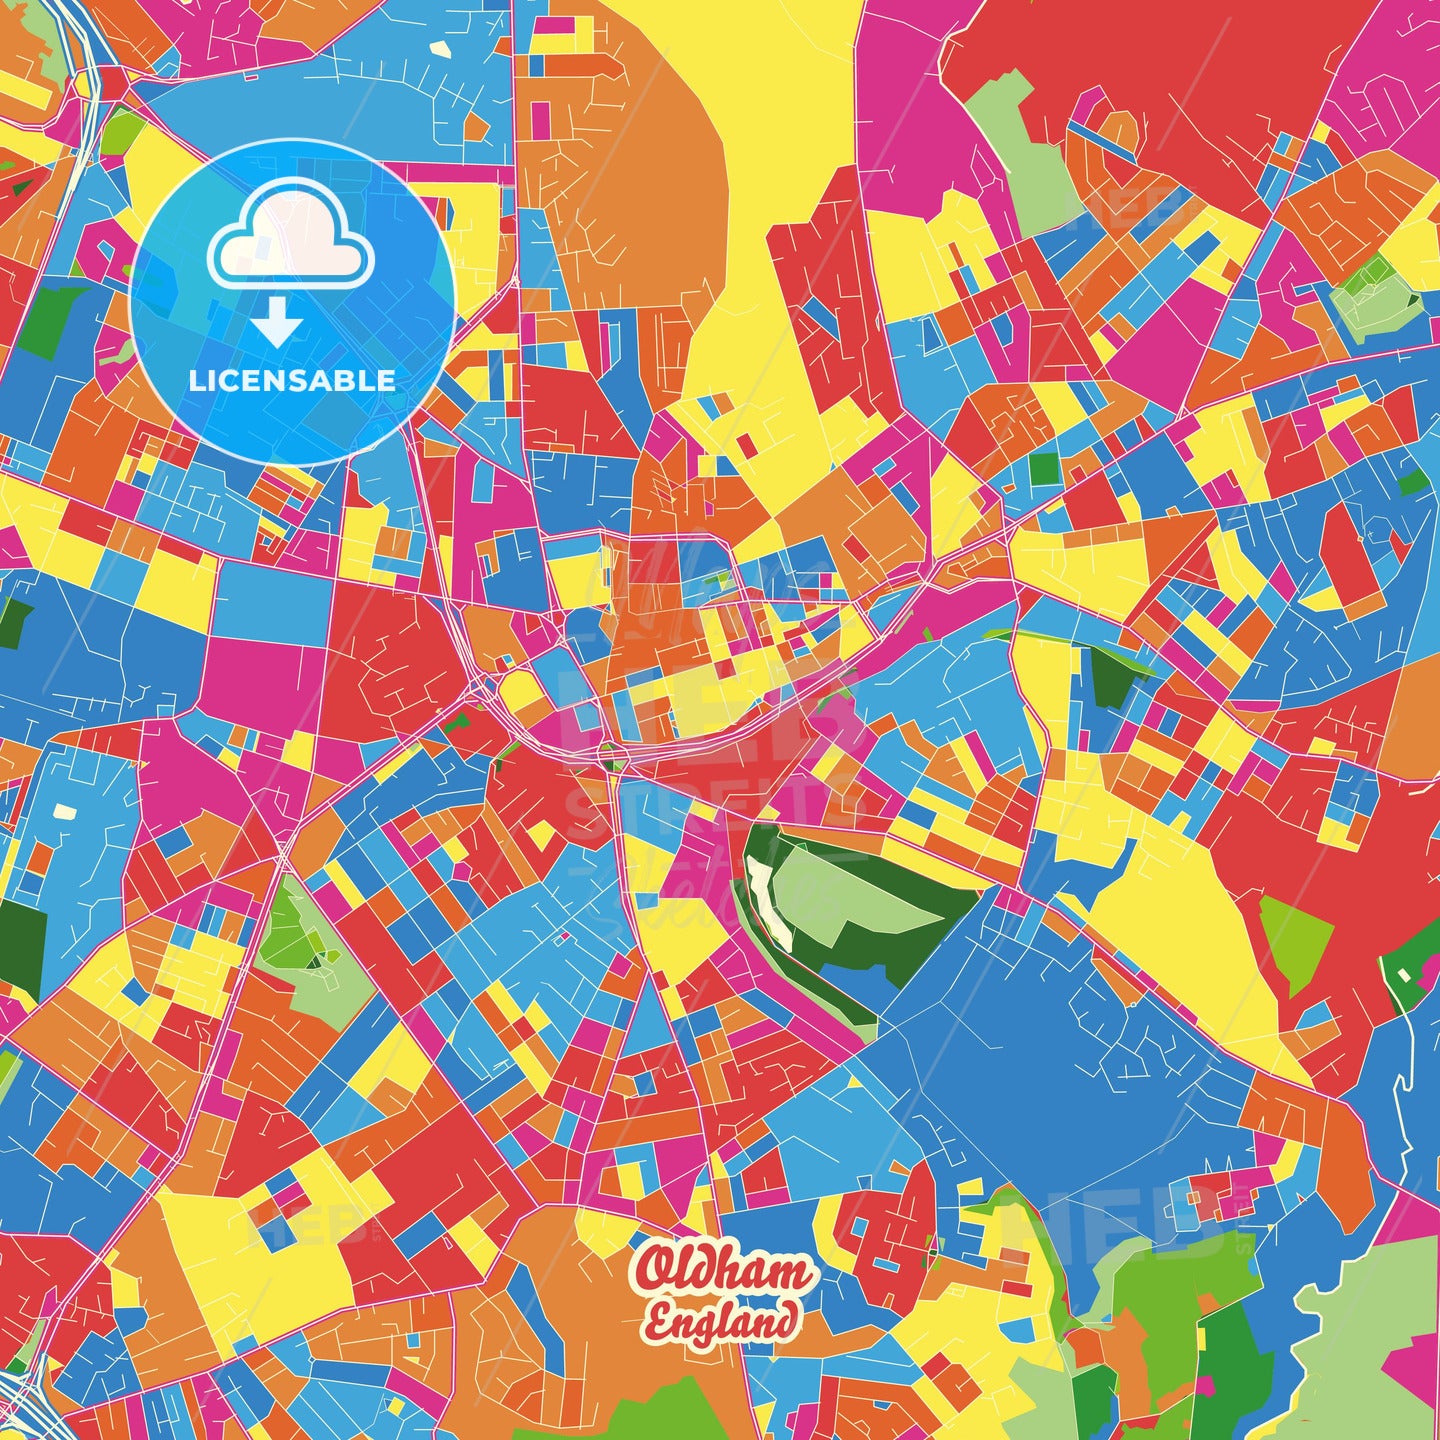 Oldham, England Crazy Colorful Street Map Poster Template - HEBSTREITS Sketches